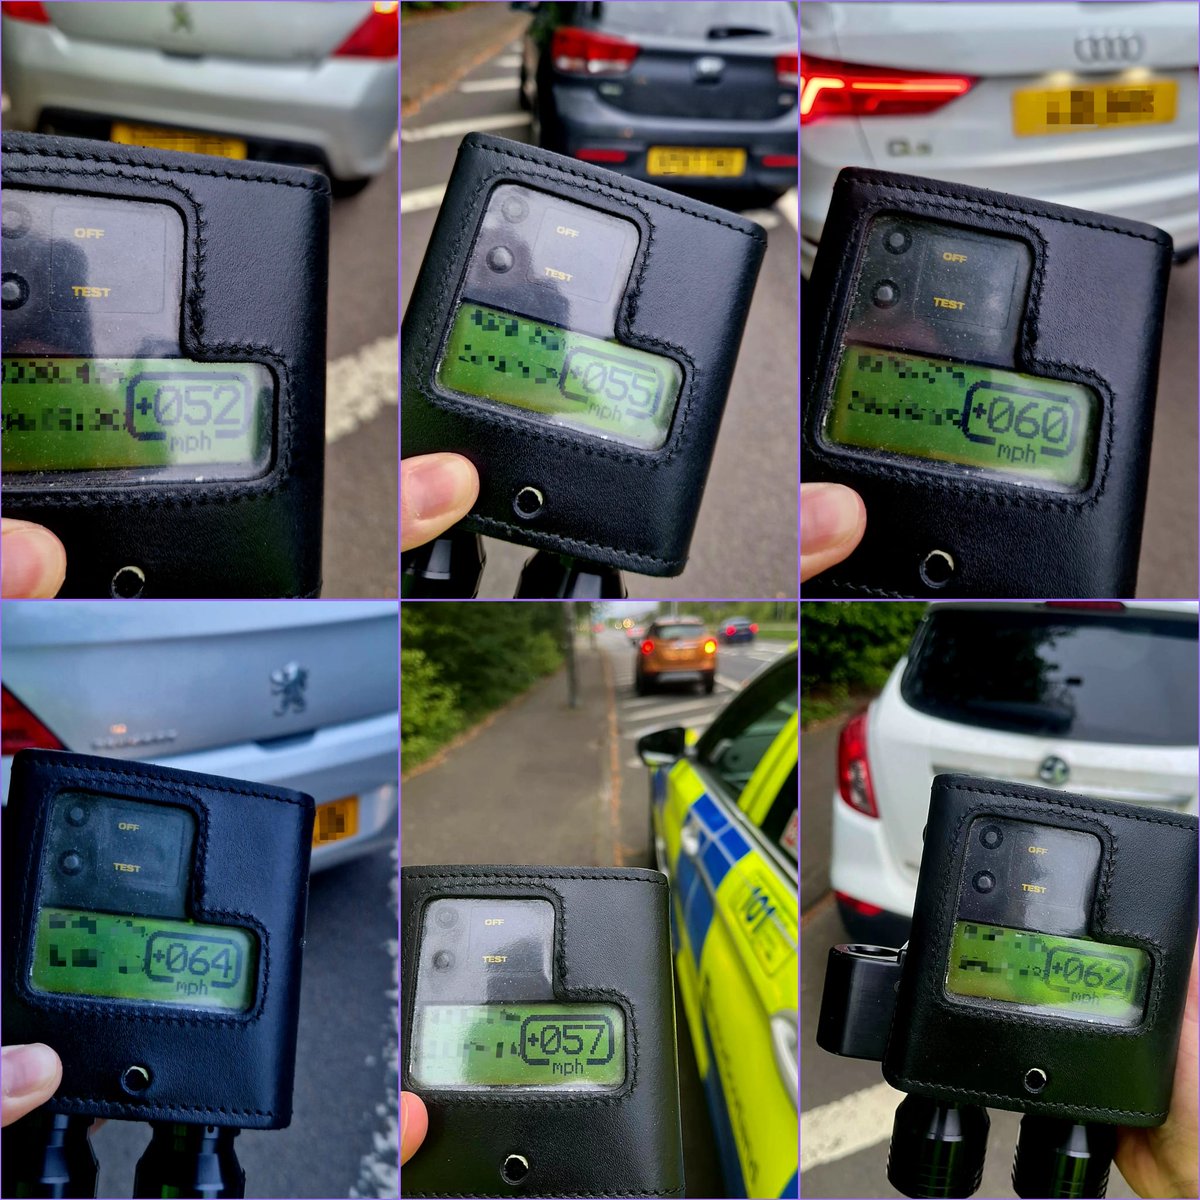 #EdinburghRP completed a speed check on the A8 ,Glasgow Road within a 40mph speed limit section yesterday evening. 8 drivers were detected exceeding the 40mph limit! 3 drivers reported to @COPFS and 5 drivers issued conditional offer tickets. #KnowYourLimits